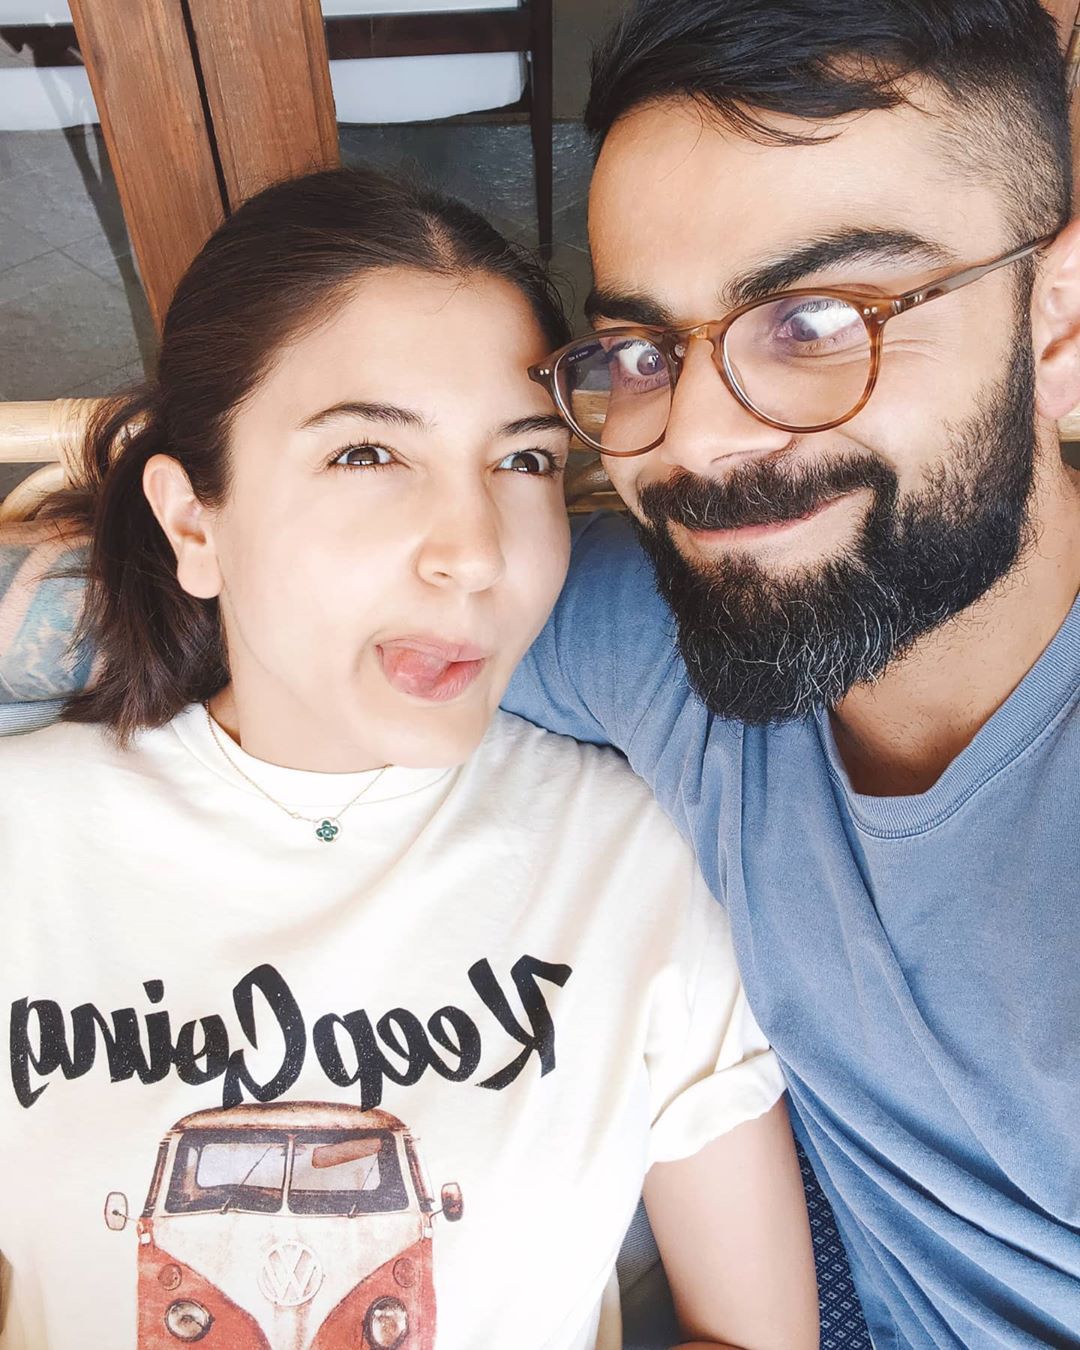 Anushka Sharma Reveals The One Thing She Does To Annoy Husband Virat Kohli, Also Talks About What He Helps Her With